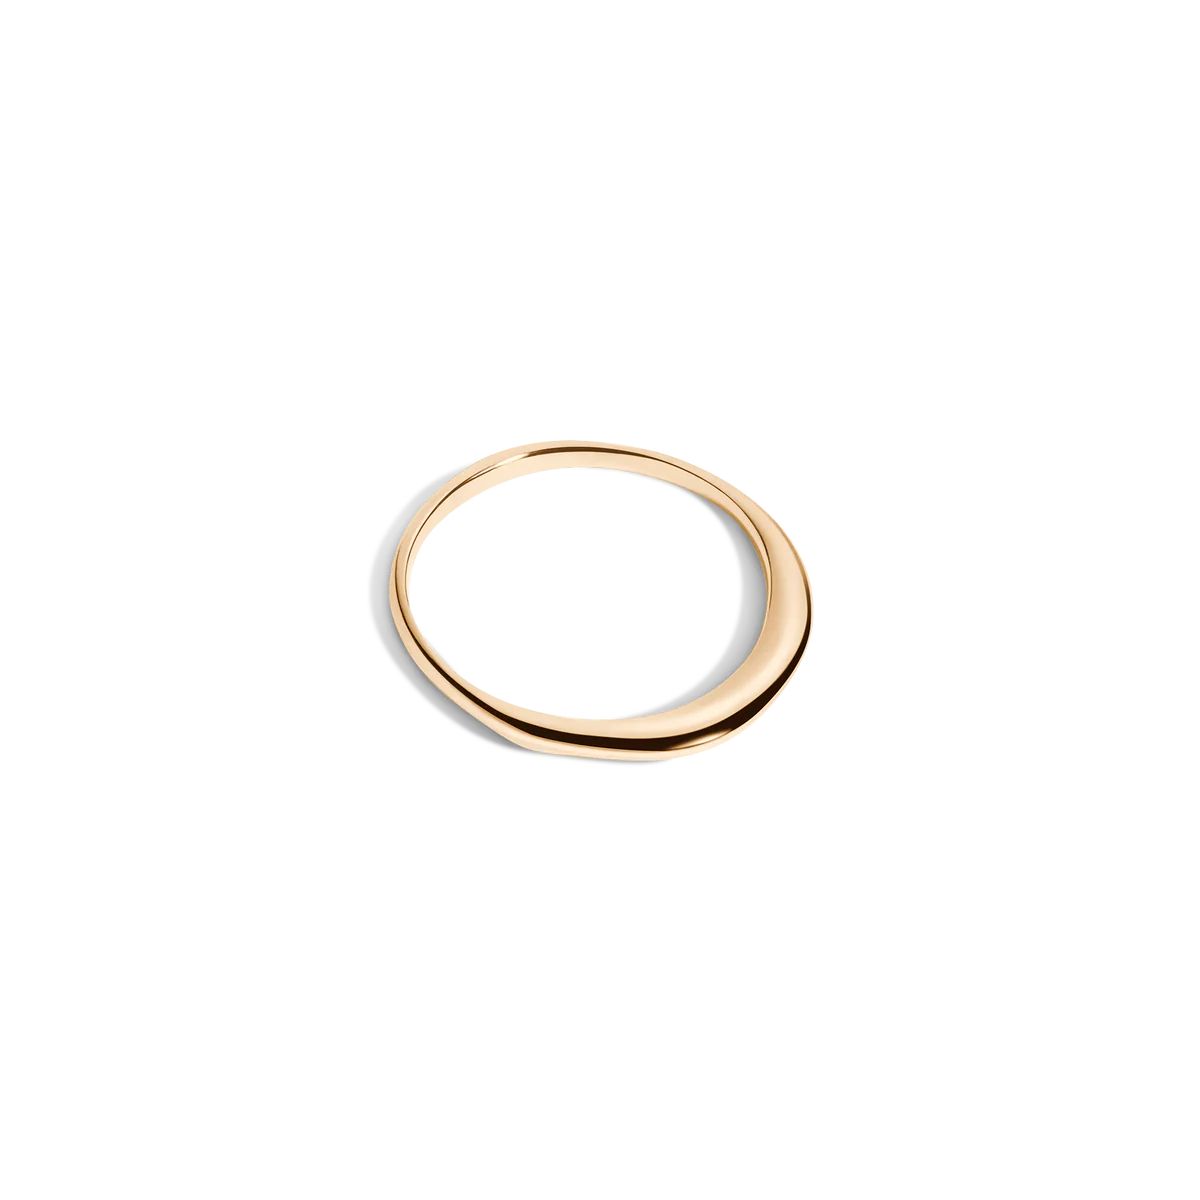 HALSTON X AURATE: The Muse Thin Gold Ring | AUrate New York